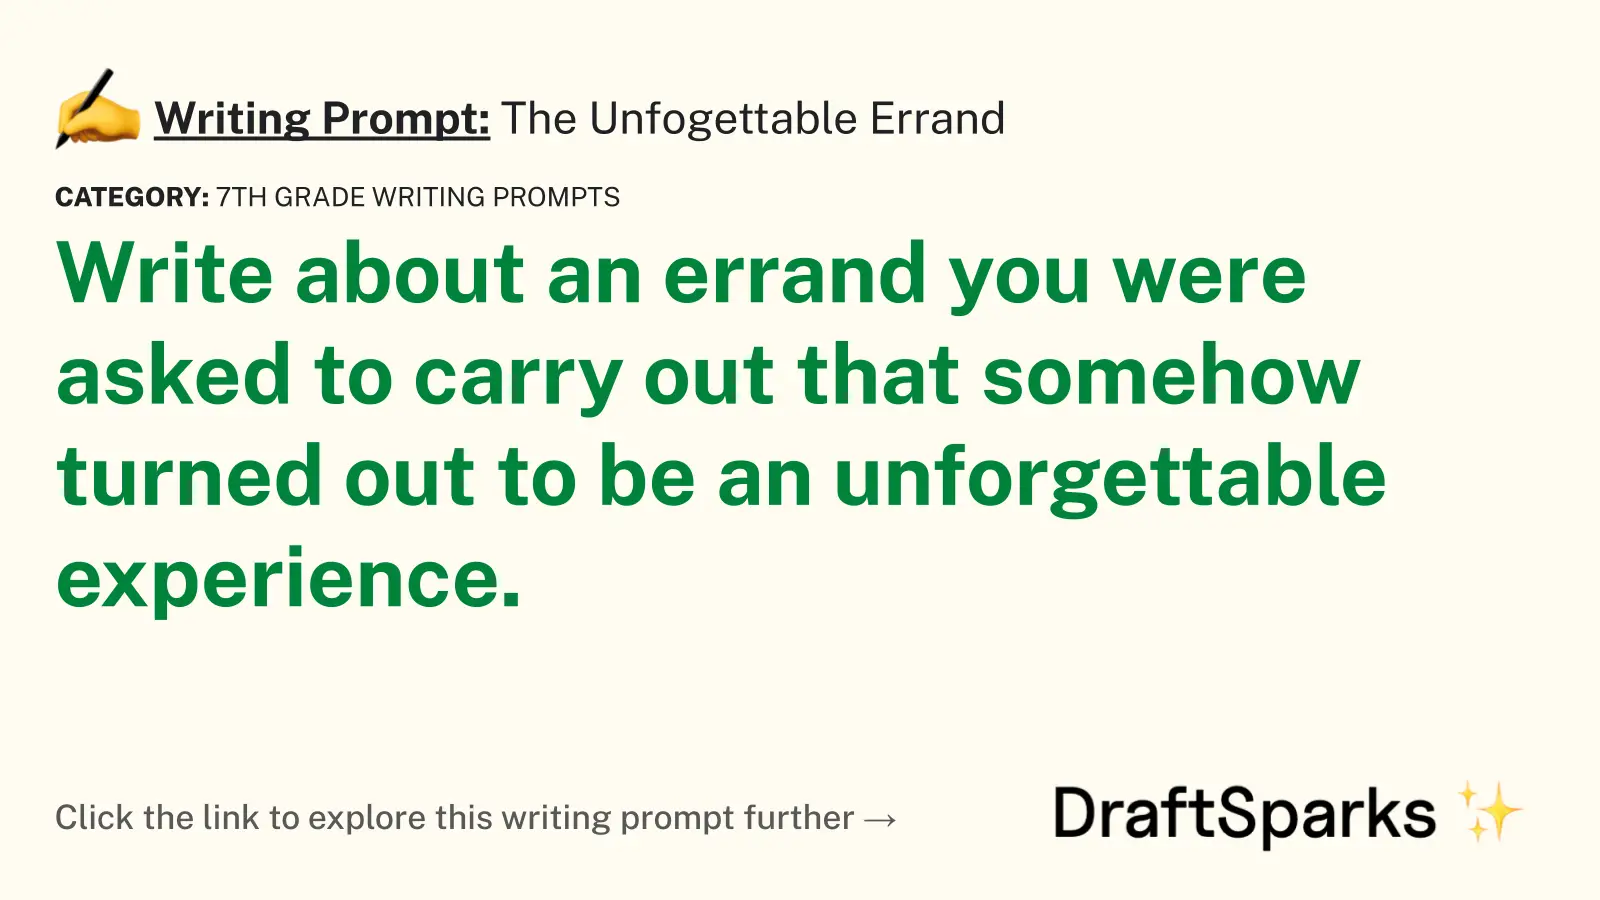 The Unfogettable Errand